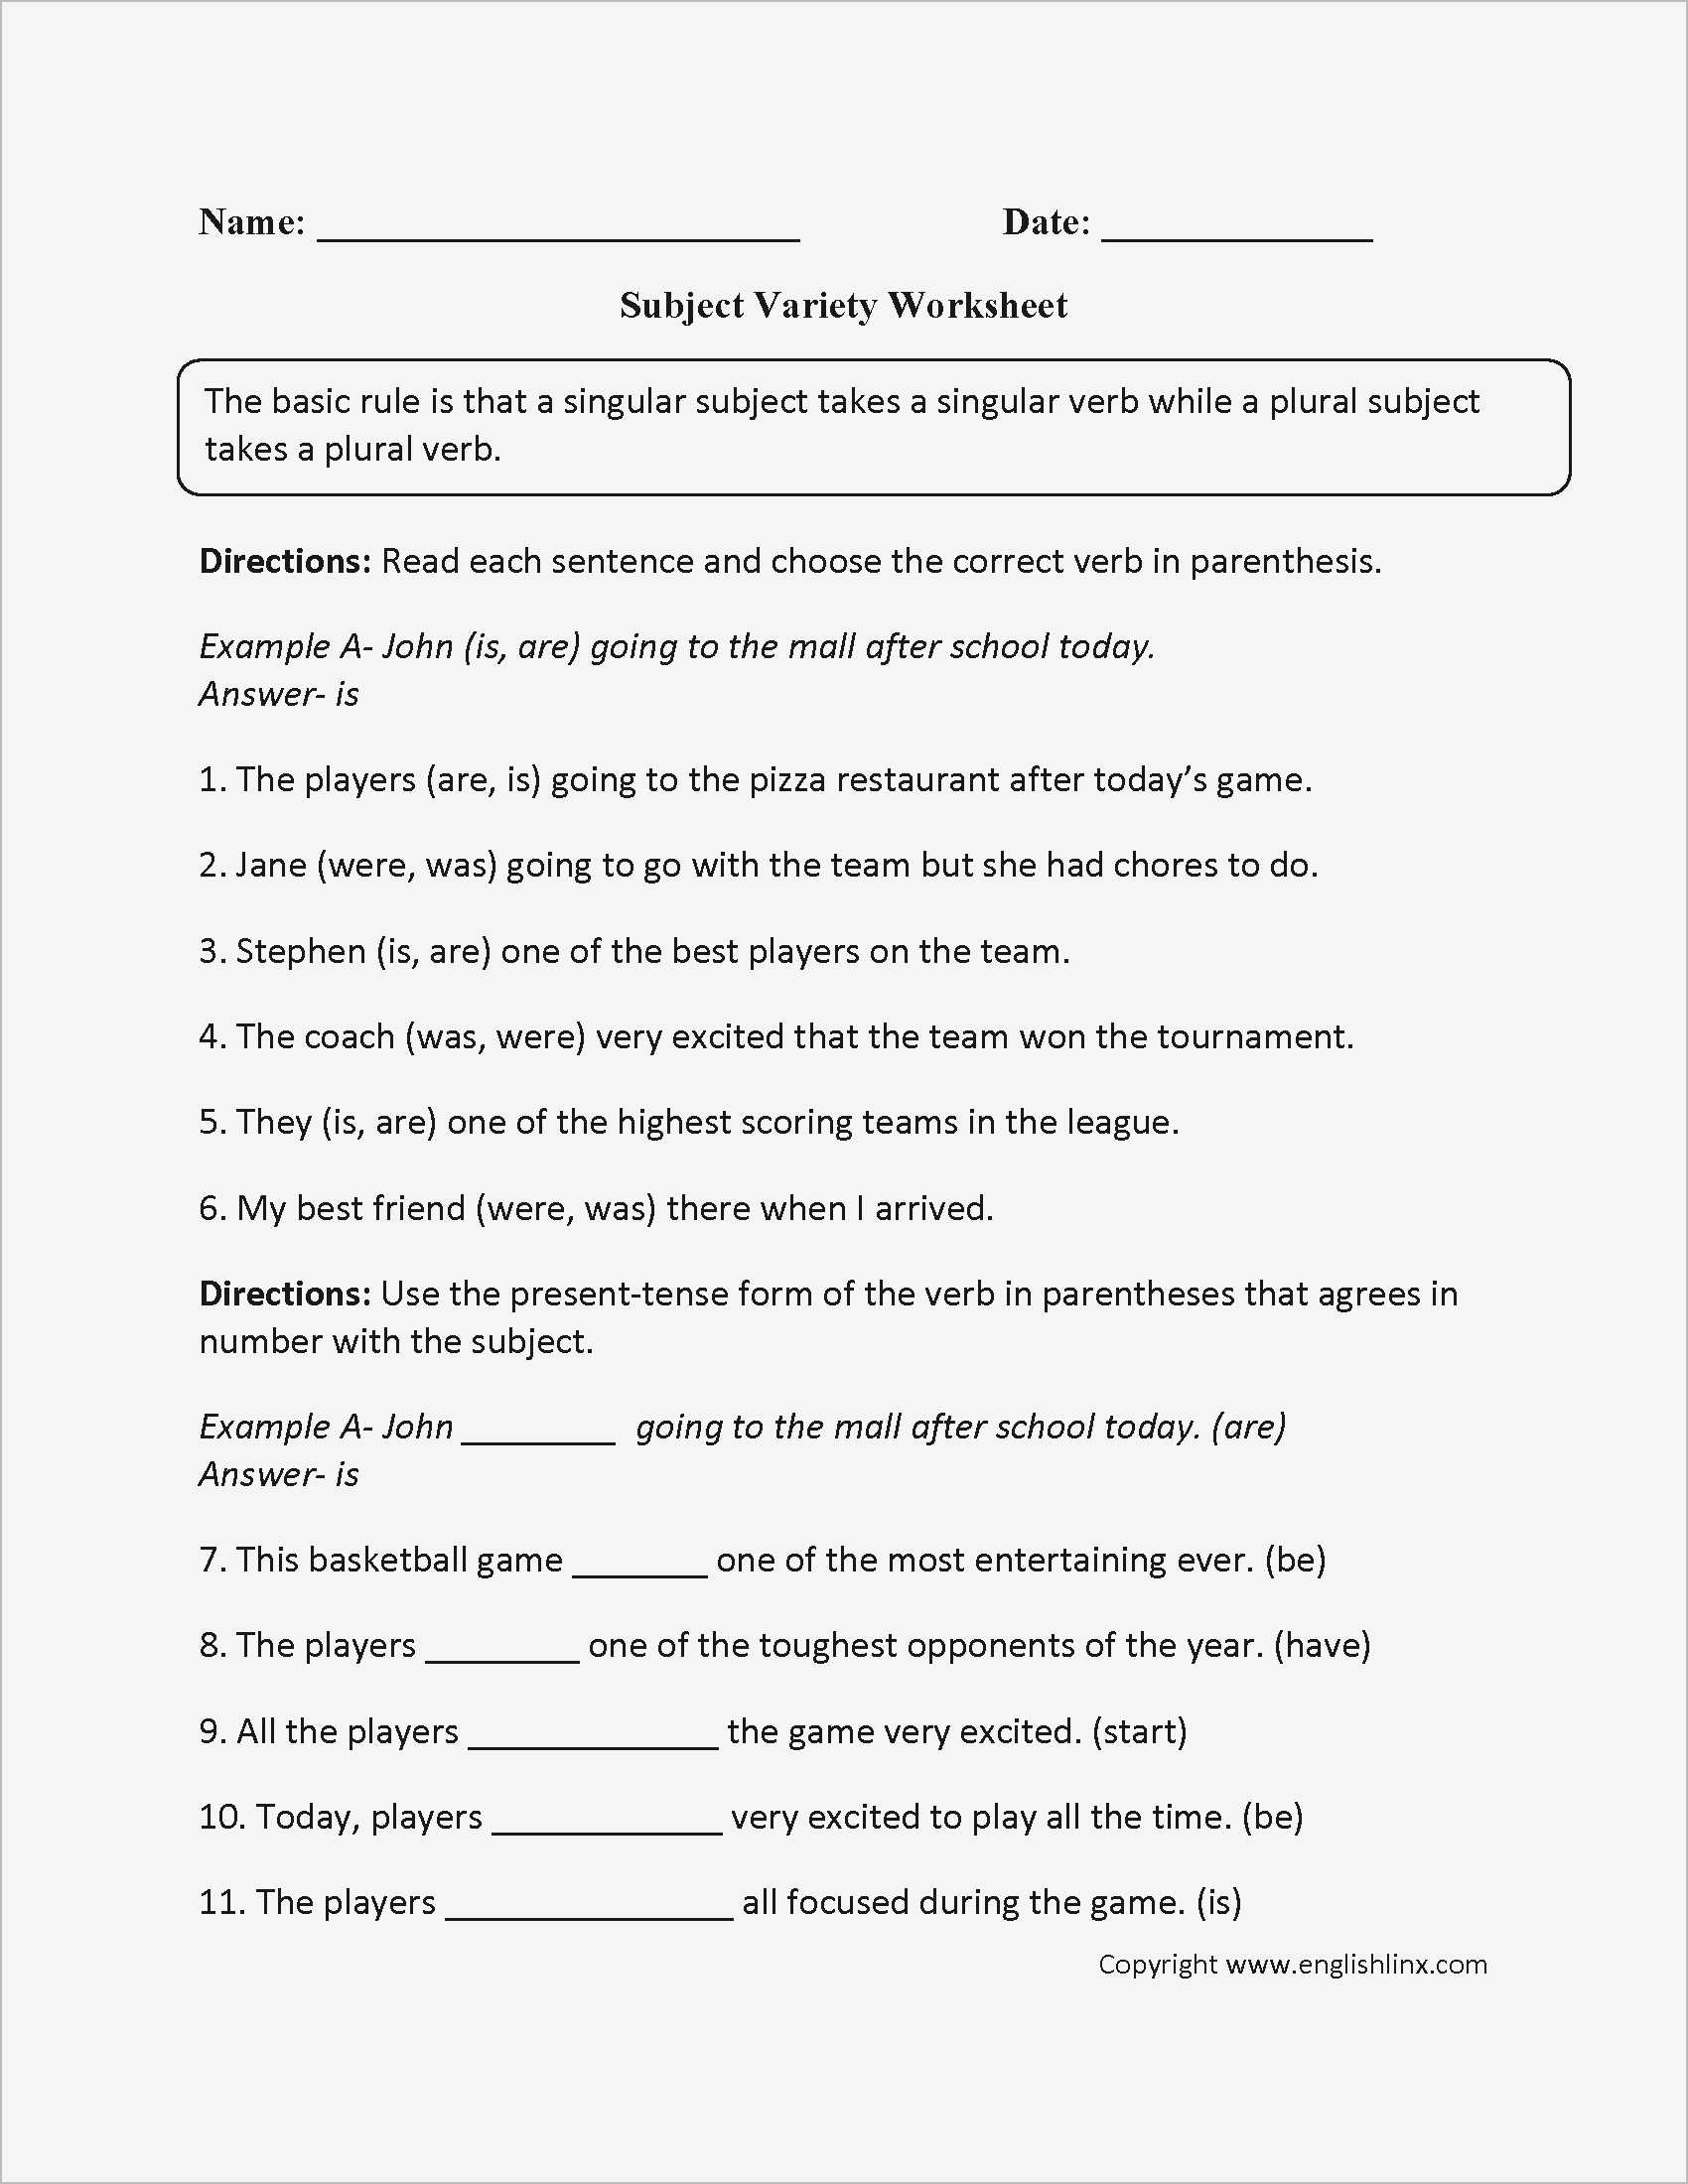 Simple Subject and Predicate Worksheets and Subject Verb Agreement Games Pdf format